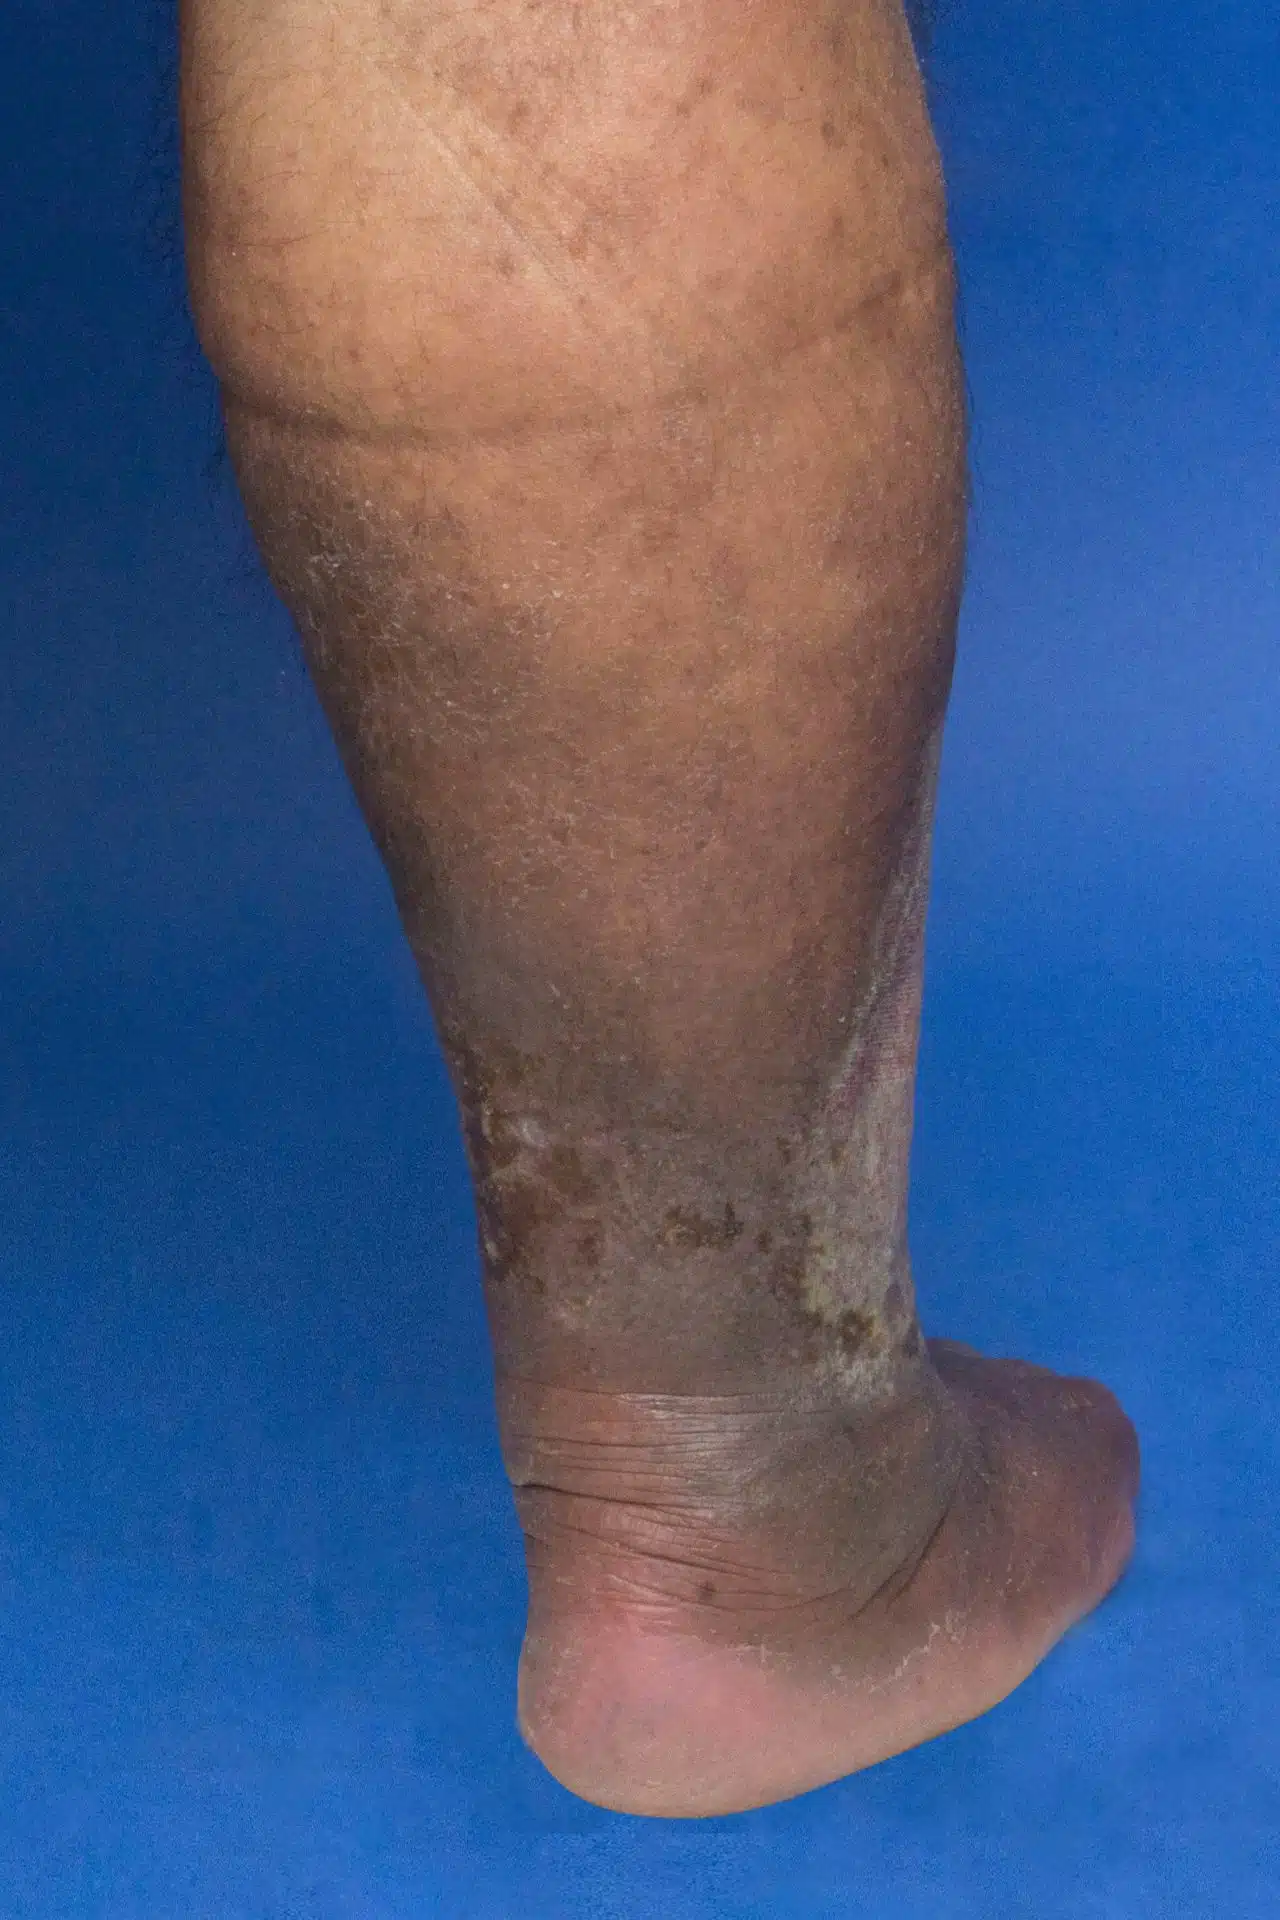 Lower Leg Discoloration: What Does It Mean?